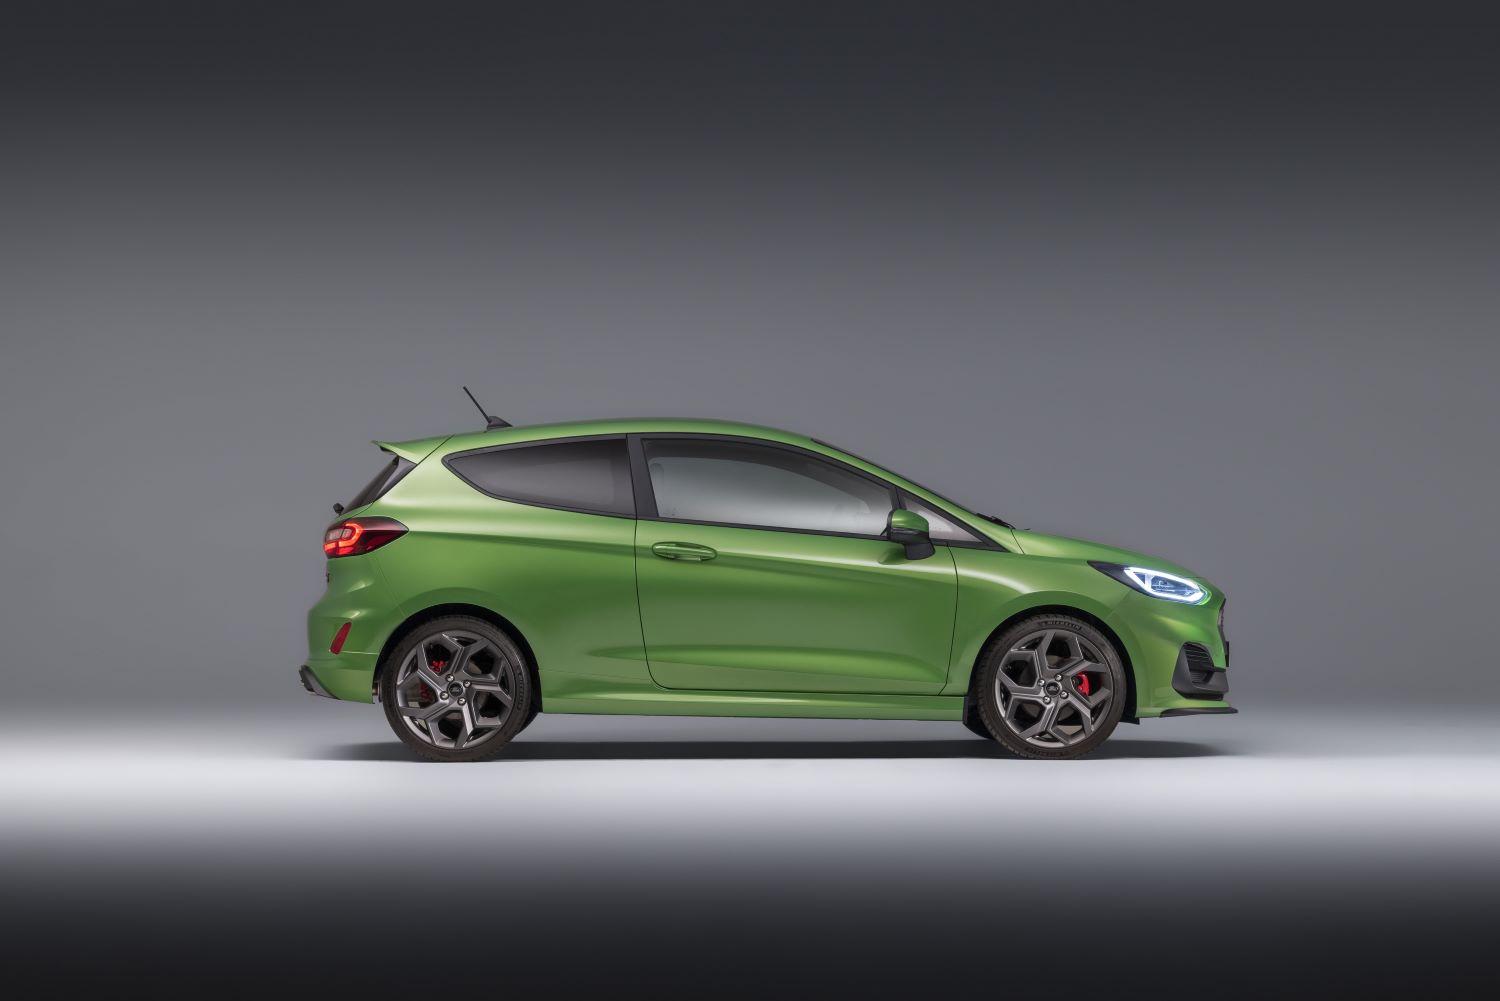 achtergrond tekst ik draag kleding 2022 Ford Fiesta Lineup Revealed With New Tech, More Torque For ST